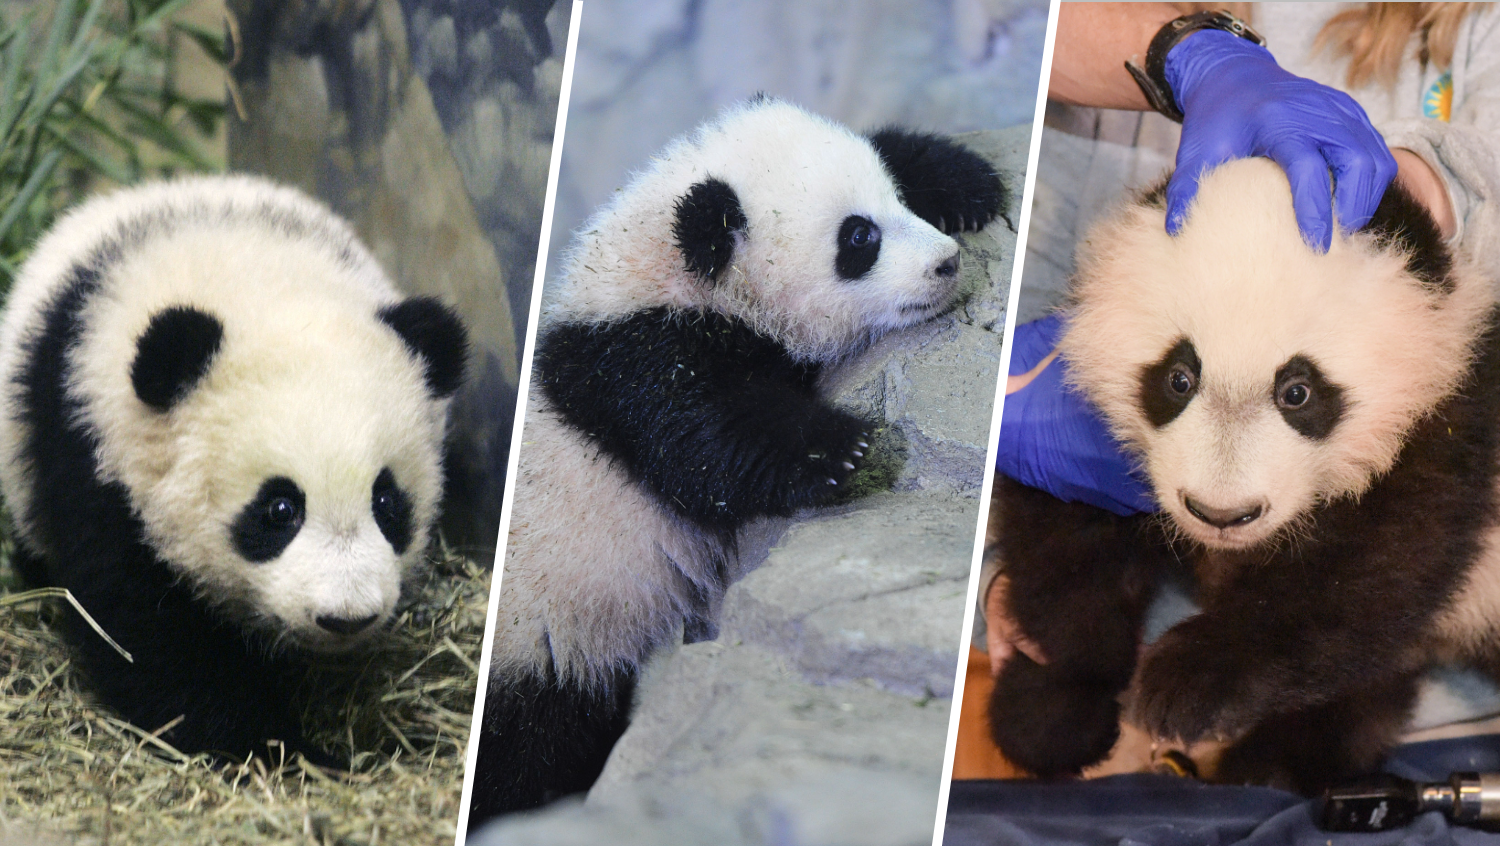 Want to meet a panda? Here's where you can find them besides China